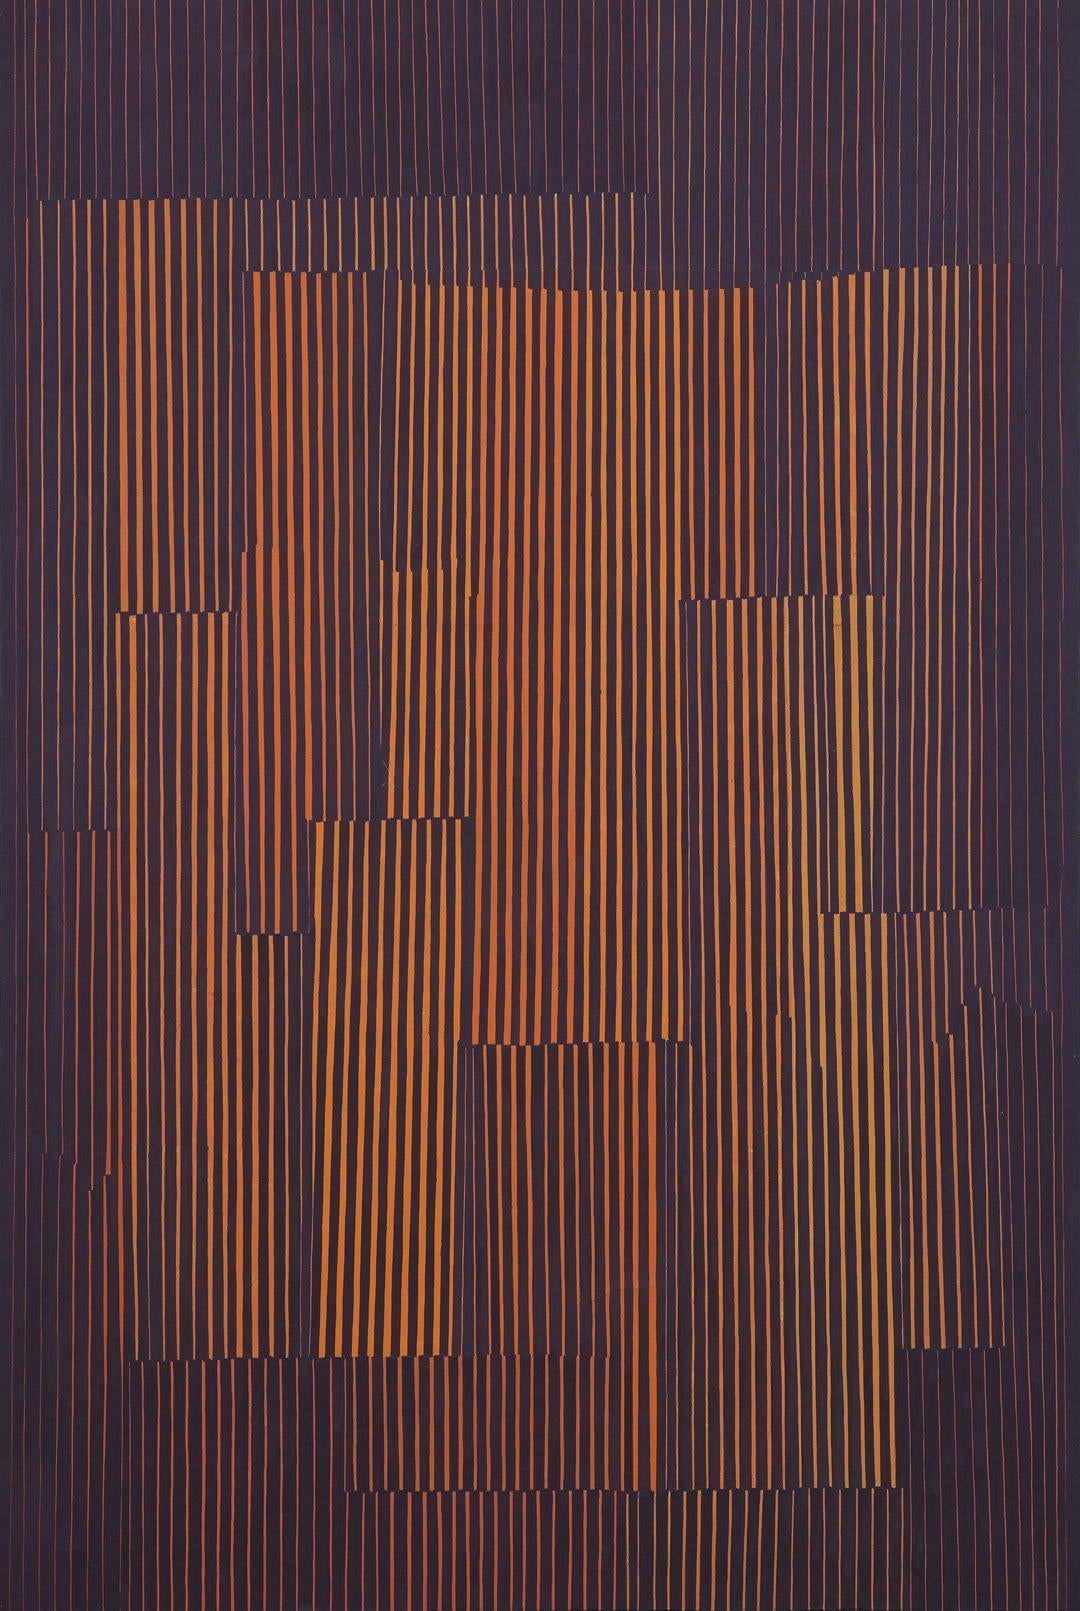 Nocturnal Variants, 1964 OpArt abstract geometric acrylic, Cleveland School